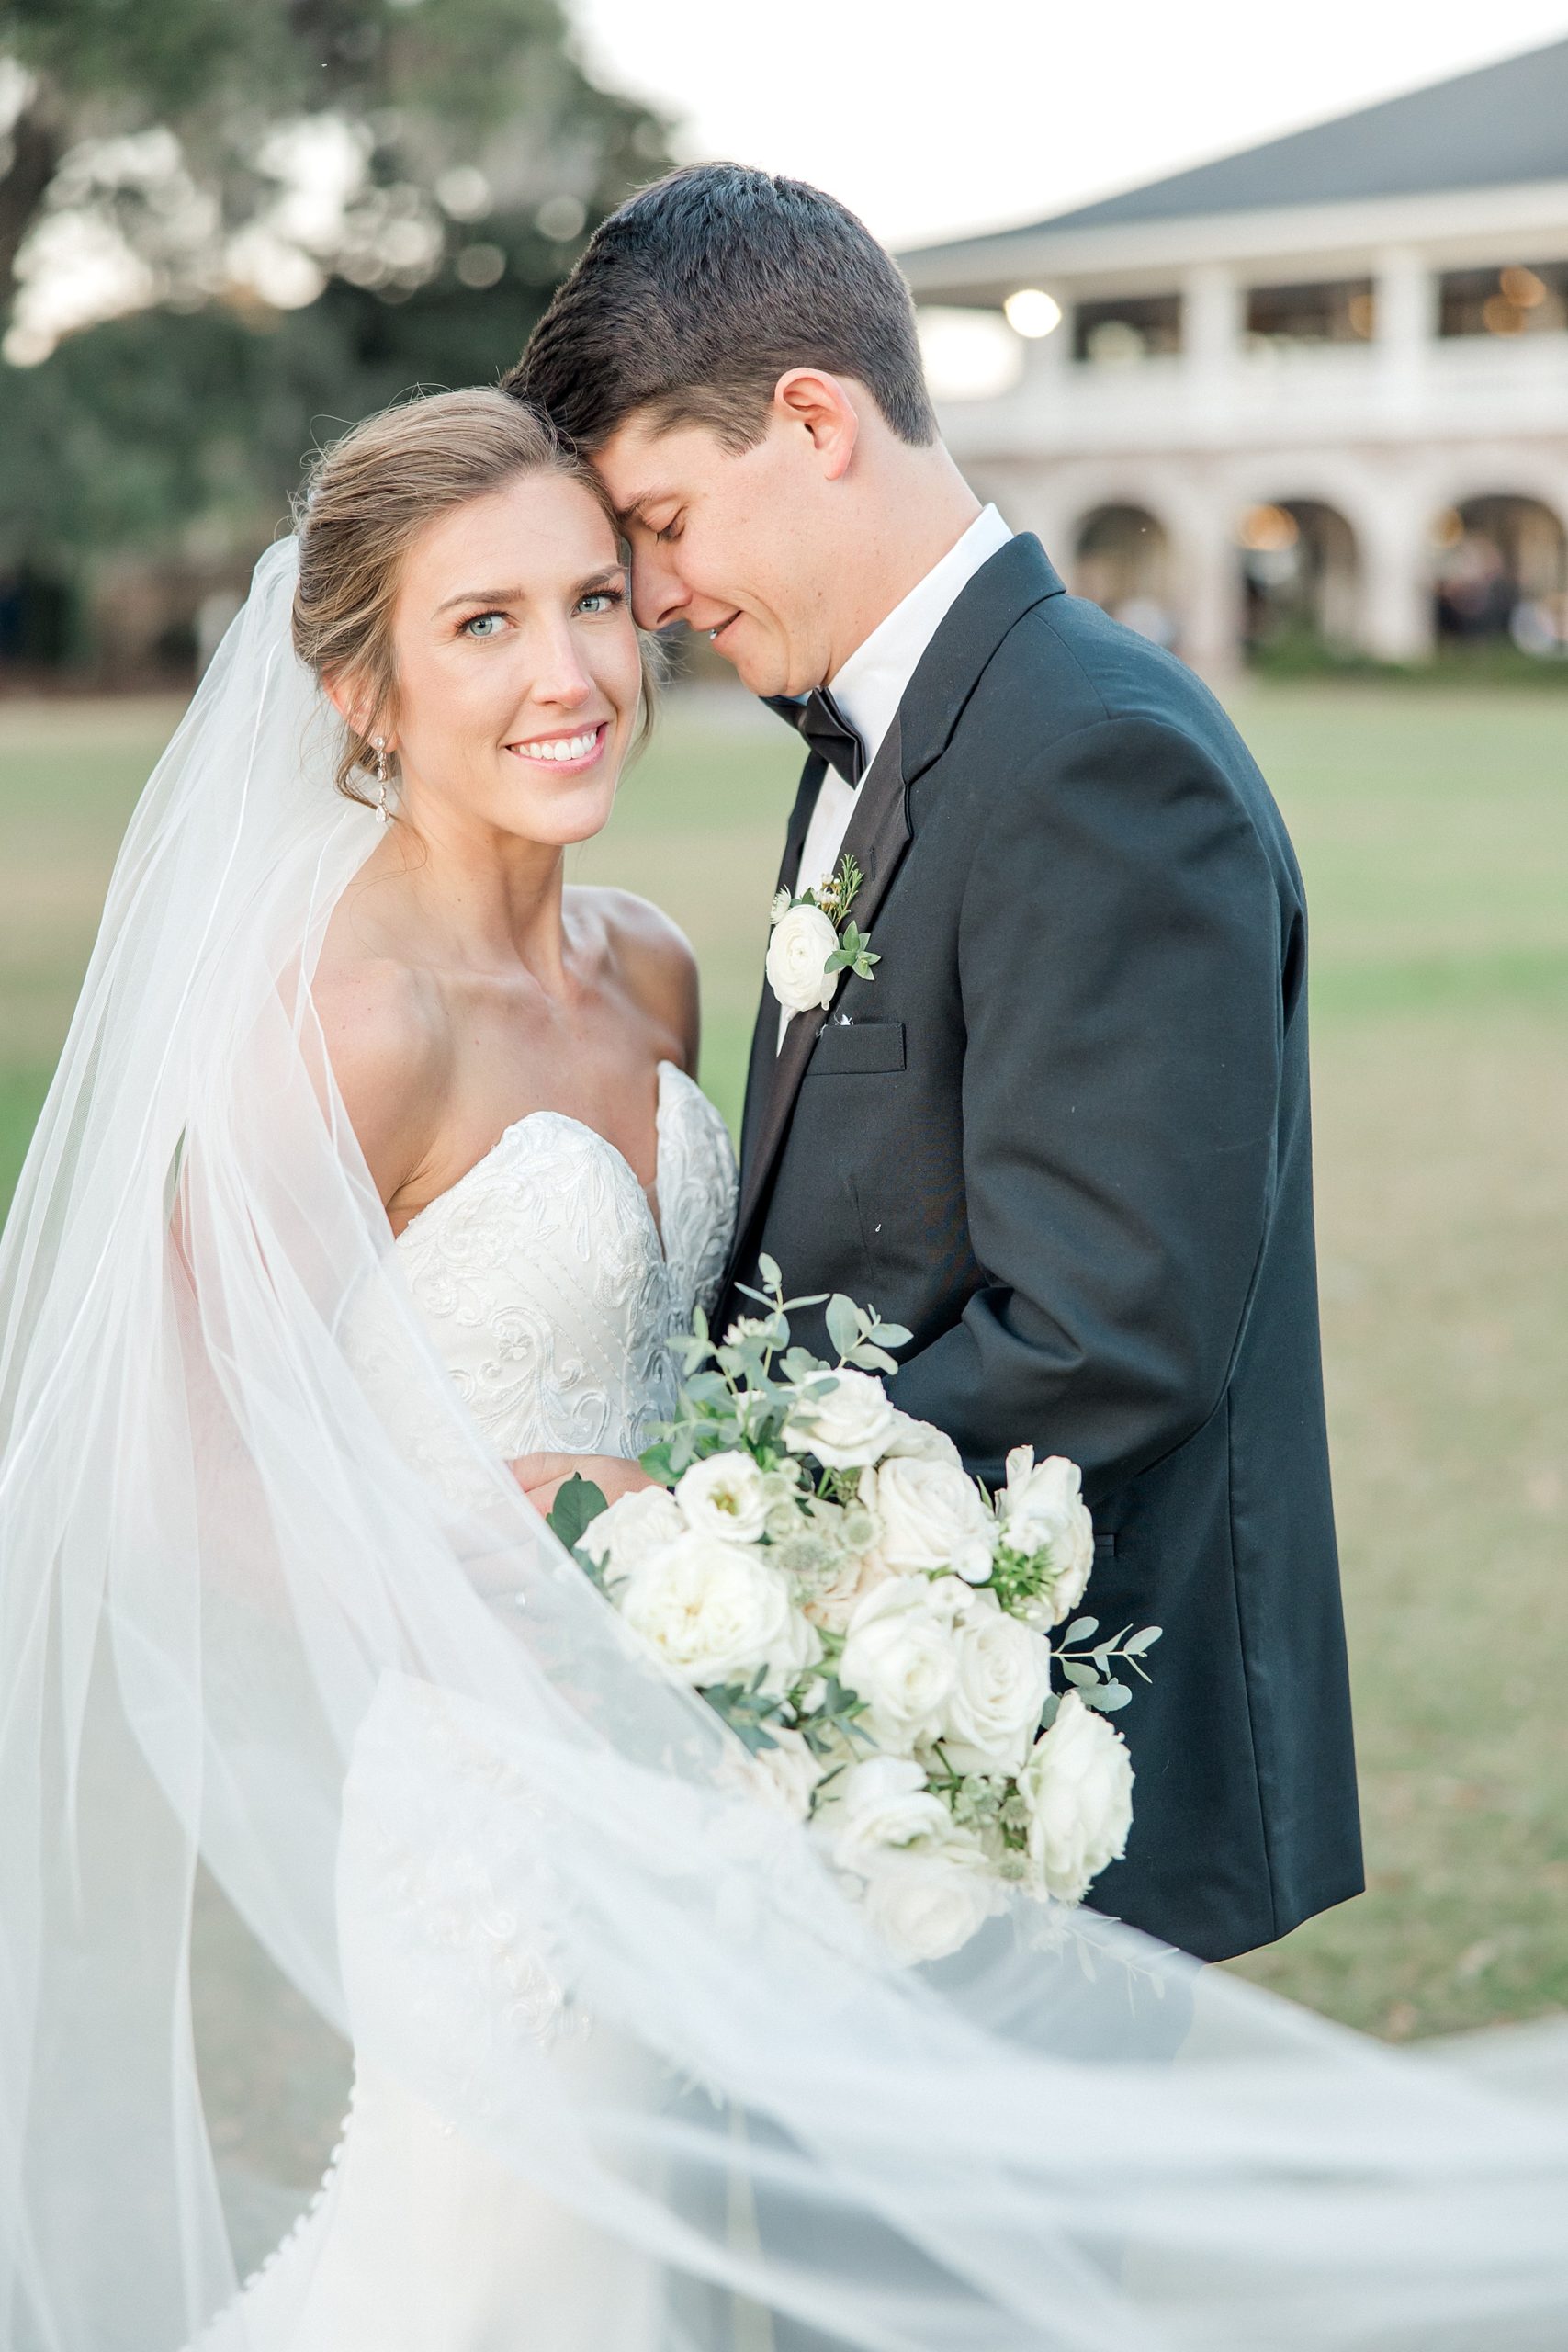 newlywed portraits with classic white flower bouquet